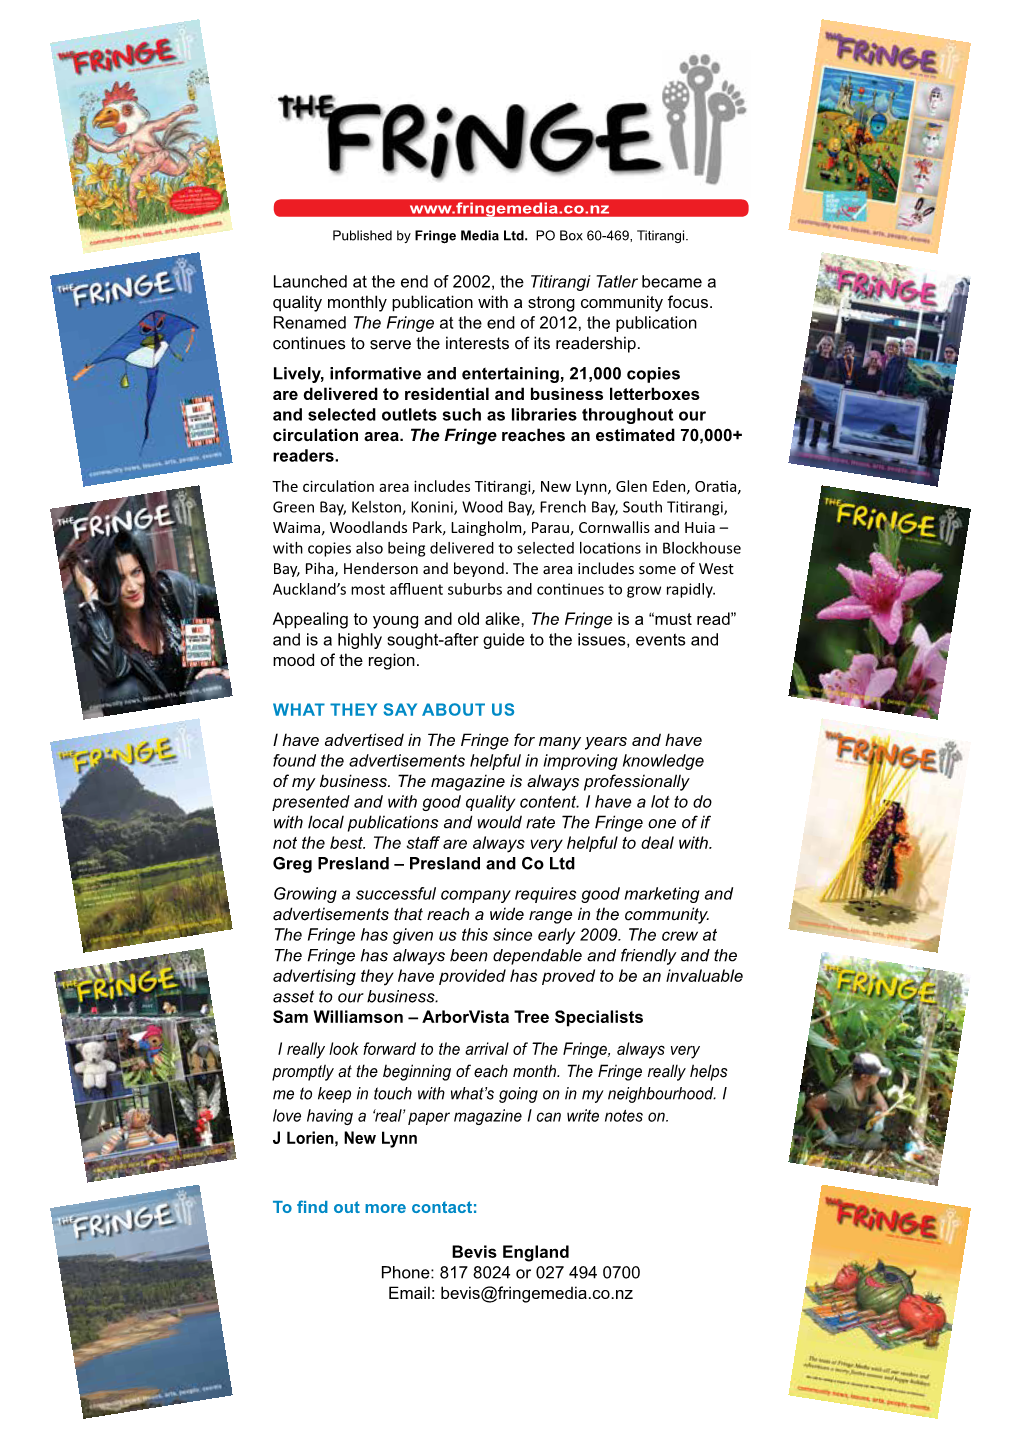 Launched at the End of 2002, the Titirangi Tatler Became a Quality Monthly Publication with a Strong Community Focus